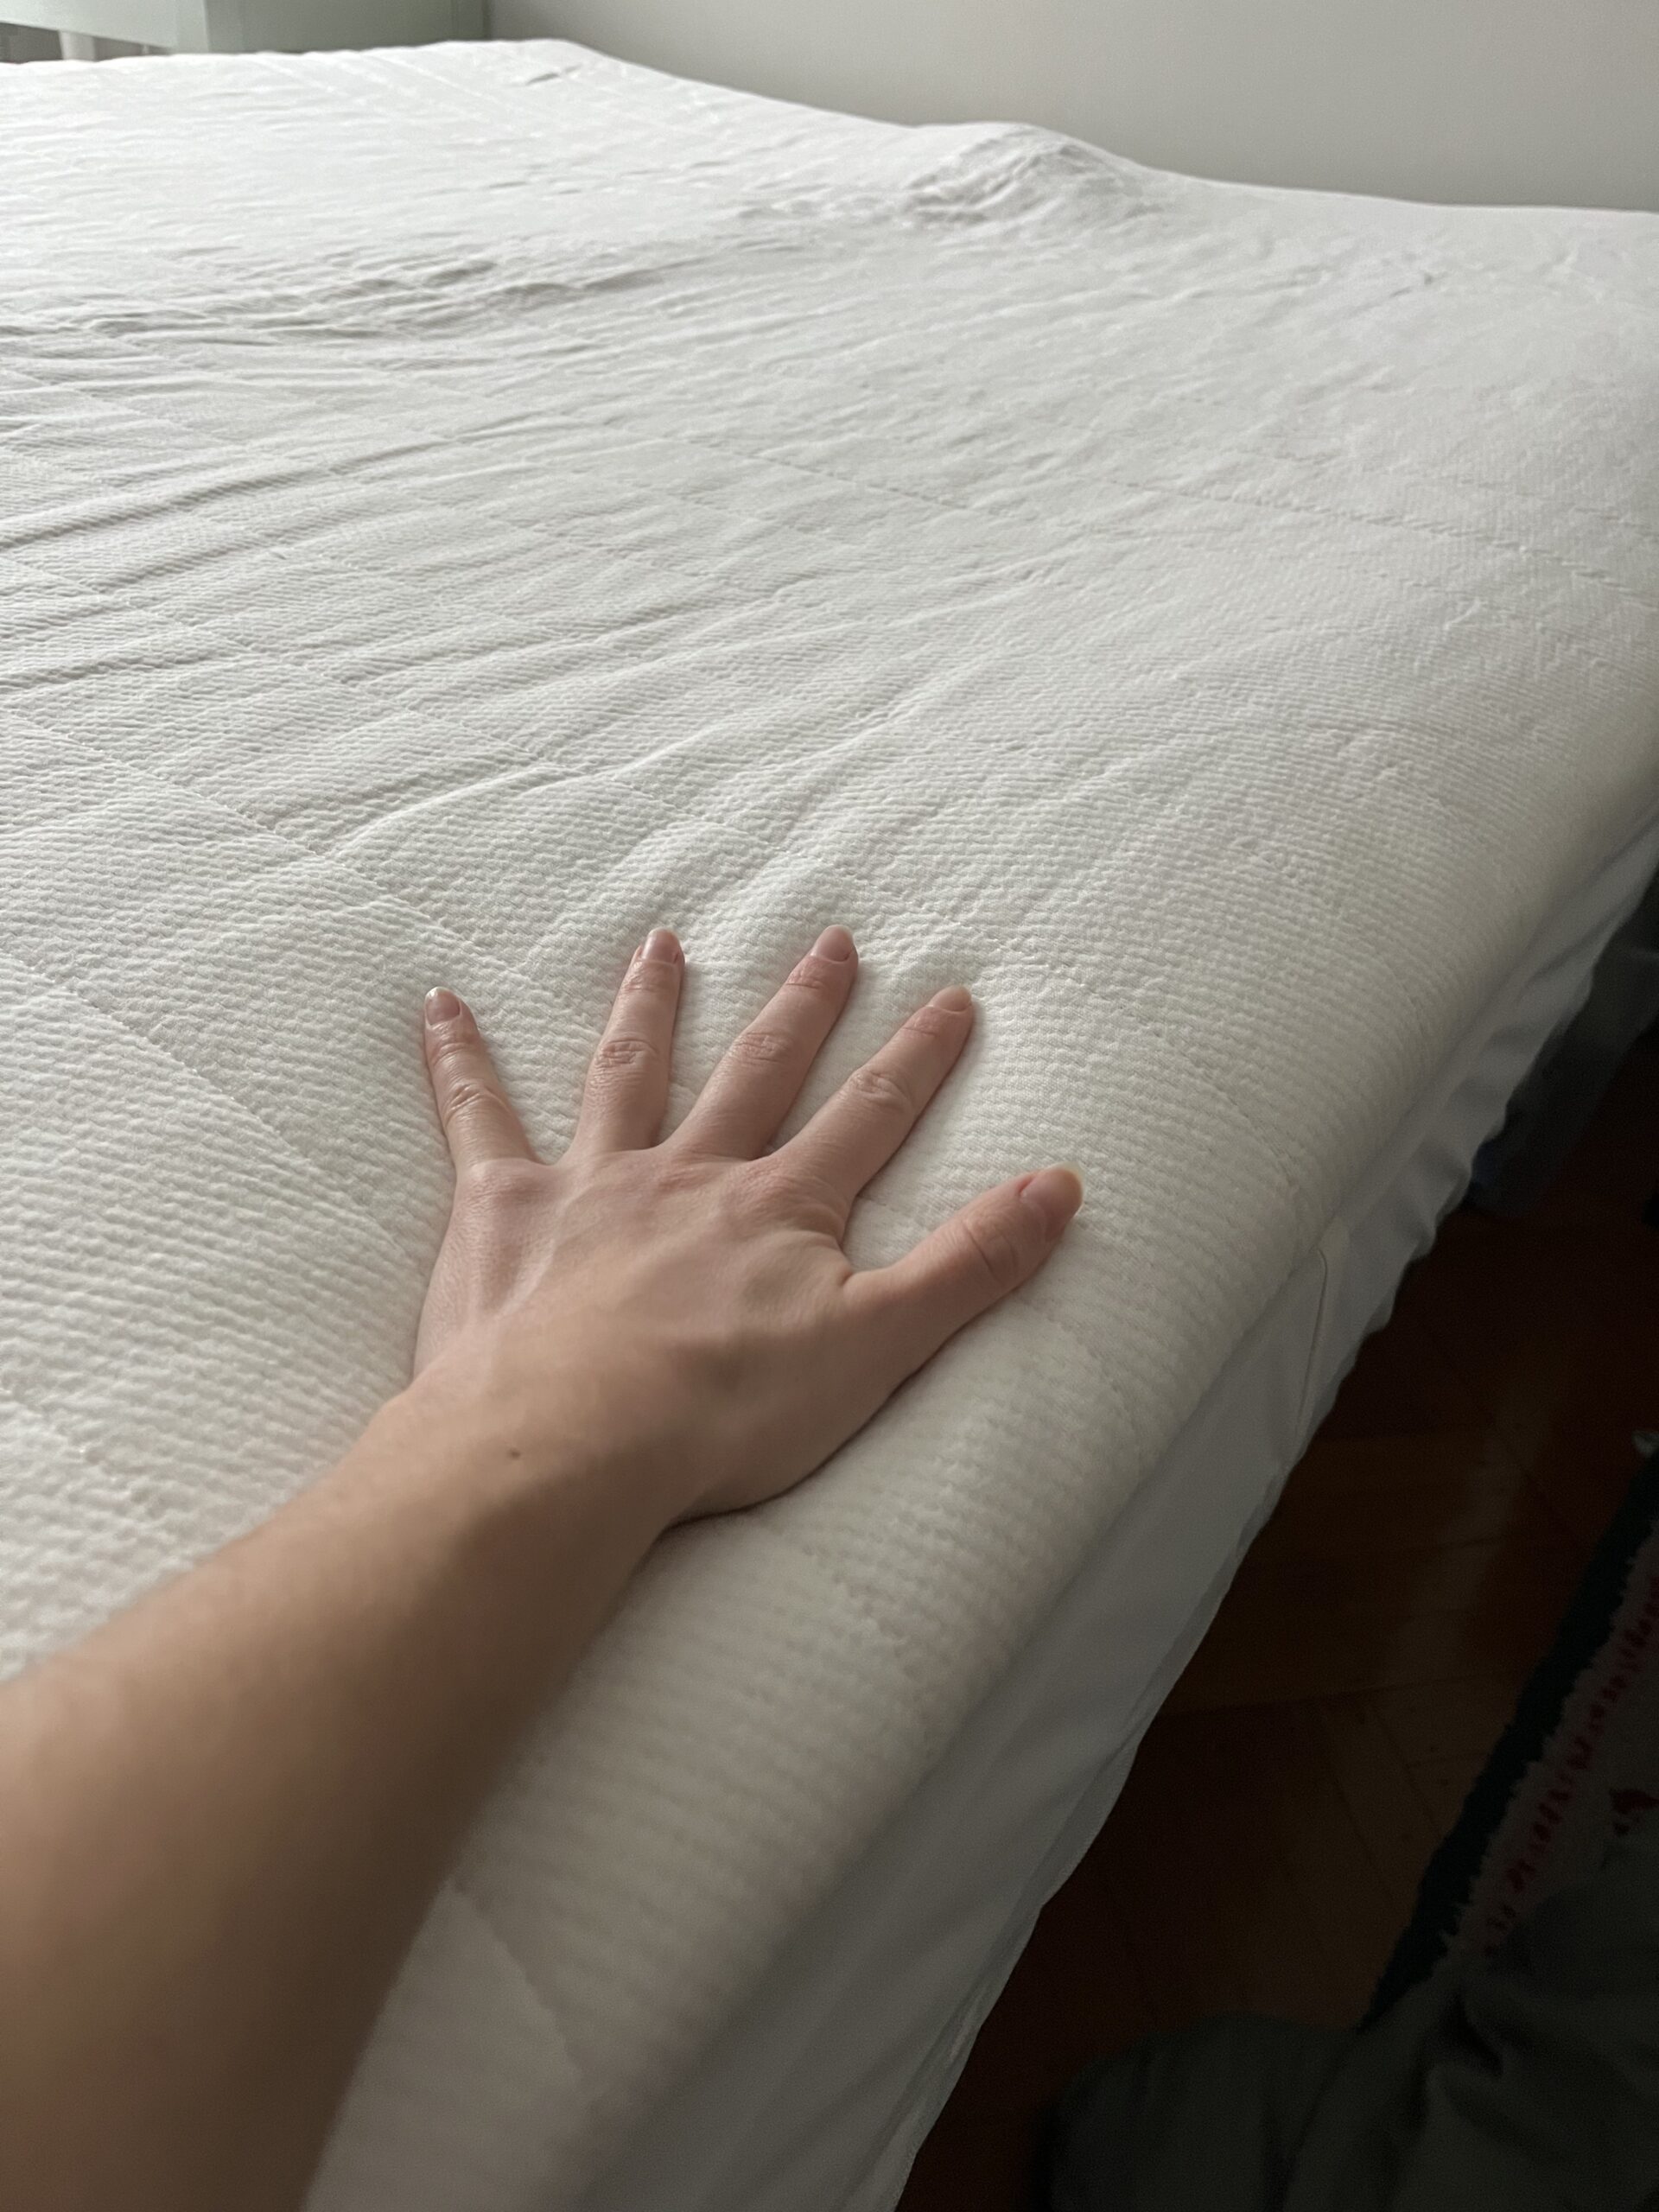 Our editor testing the mattress topper from Earthfoam